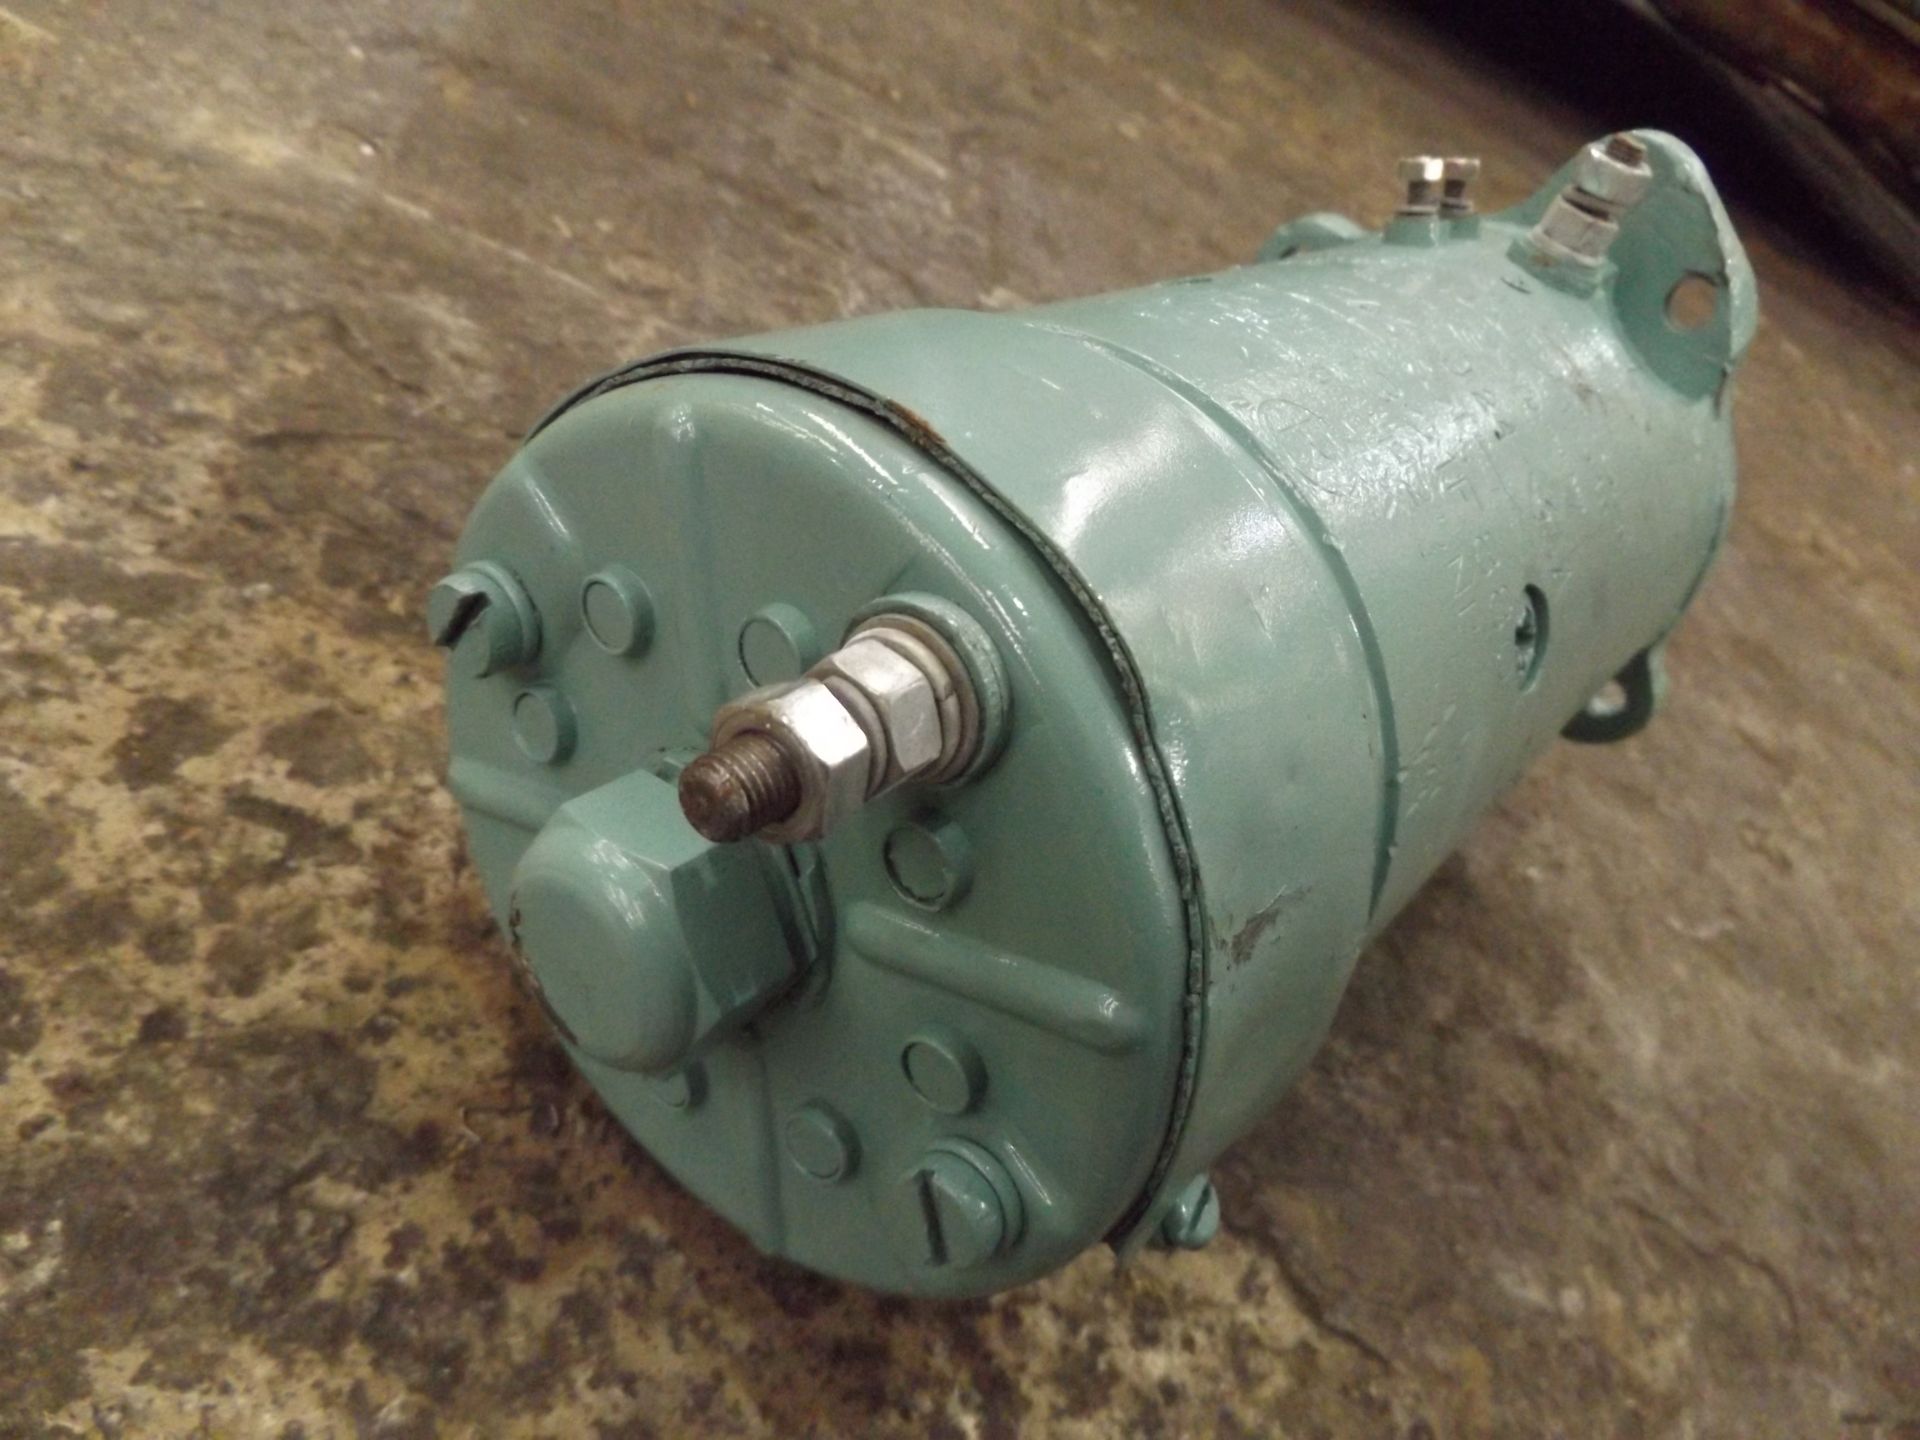 2 x A1 Reconditioned CAV CA45 Starter Motors - Image 3 of 4